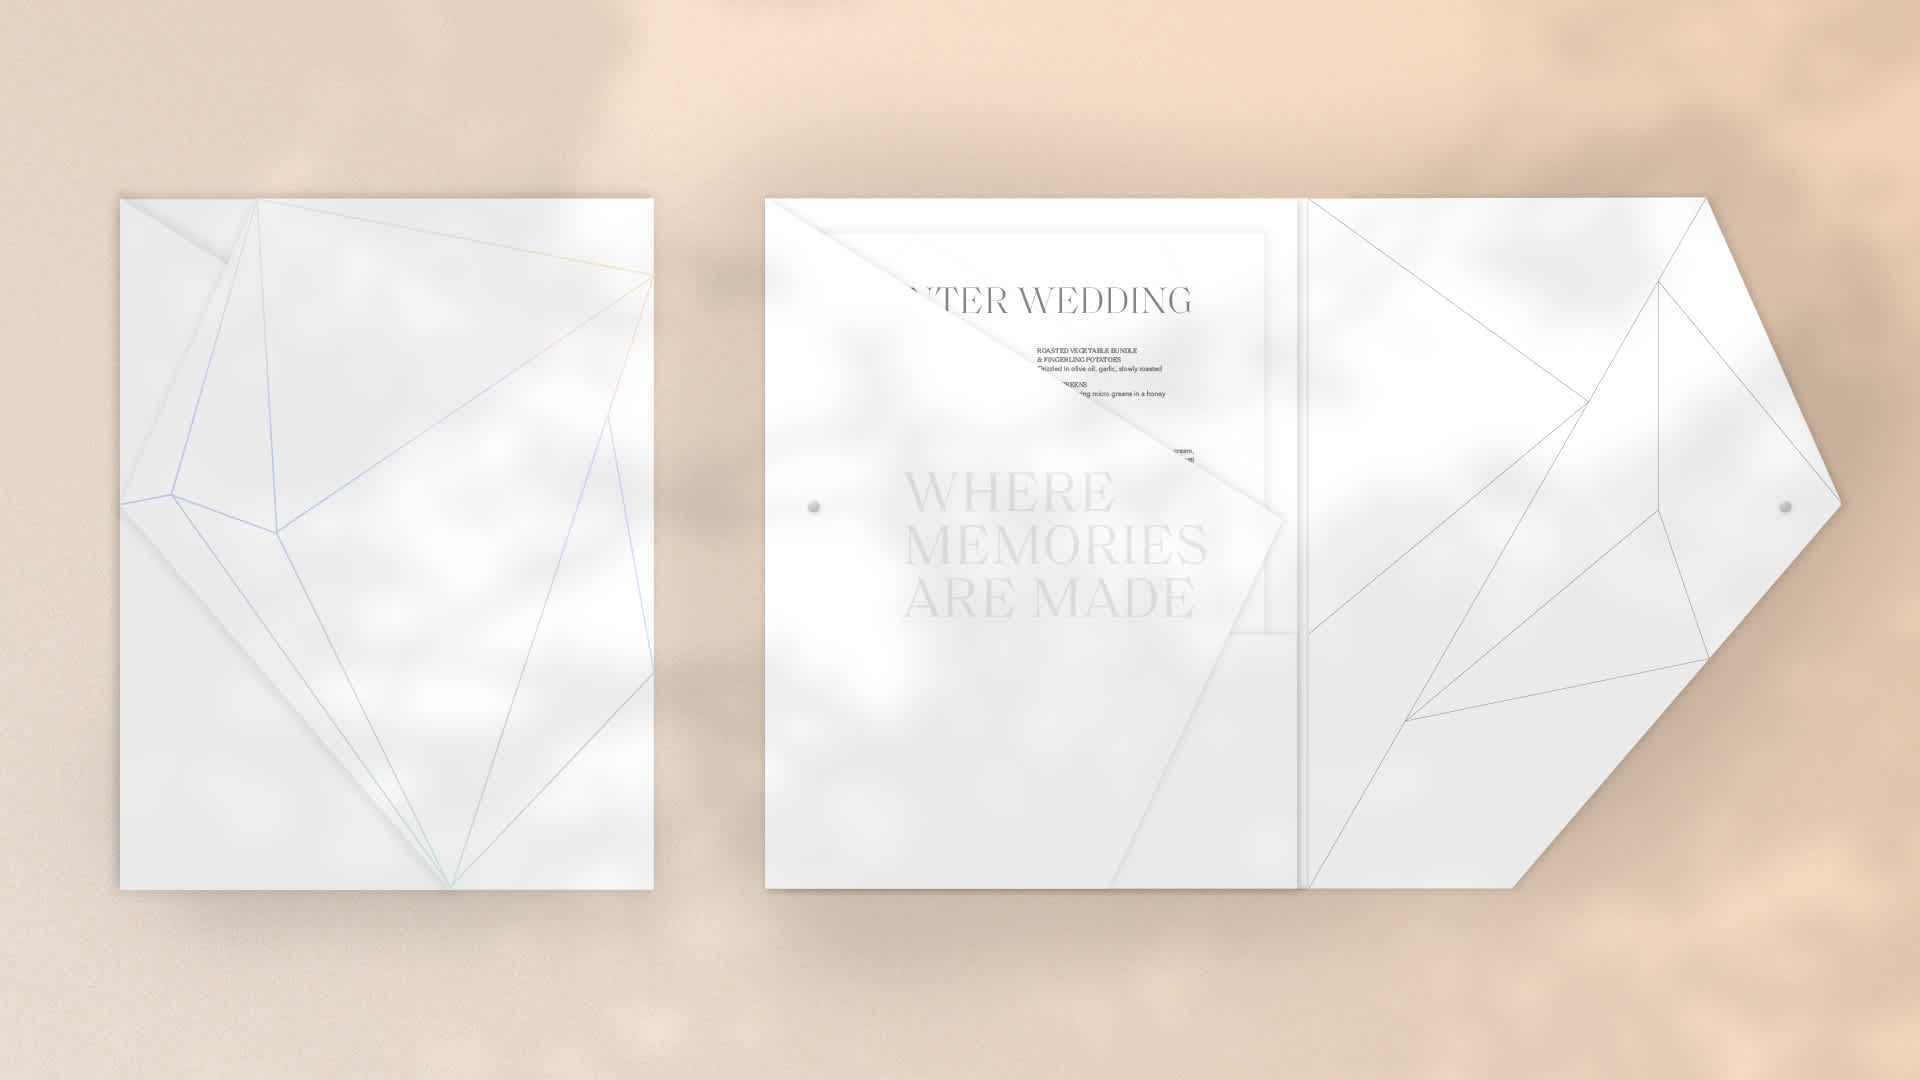 A kit folder made for Paradise Banquet Halls showing the cover on the left and the opened folder on the right showcasing the unique angles resembling the gemstone motif shared throughout their branding. 